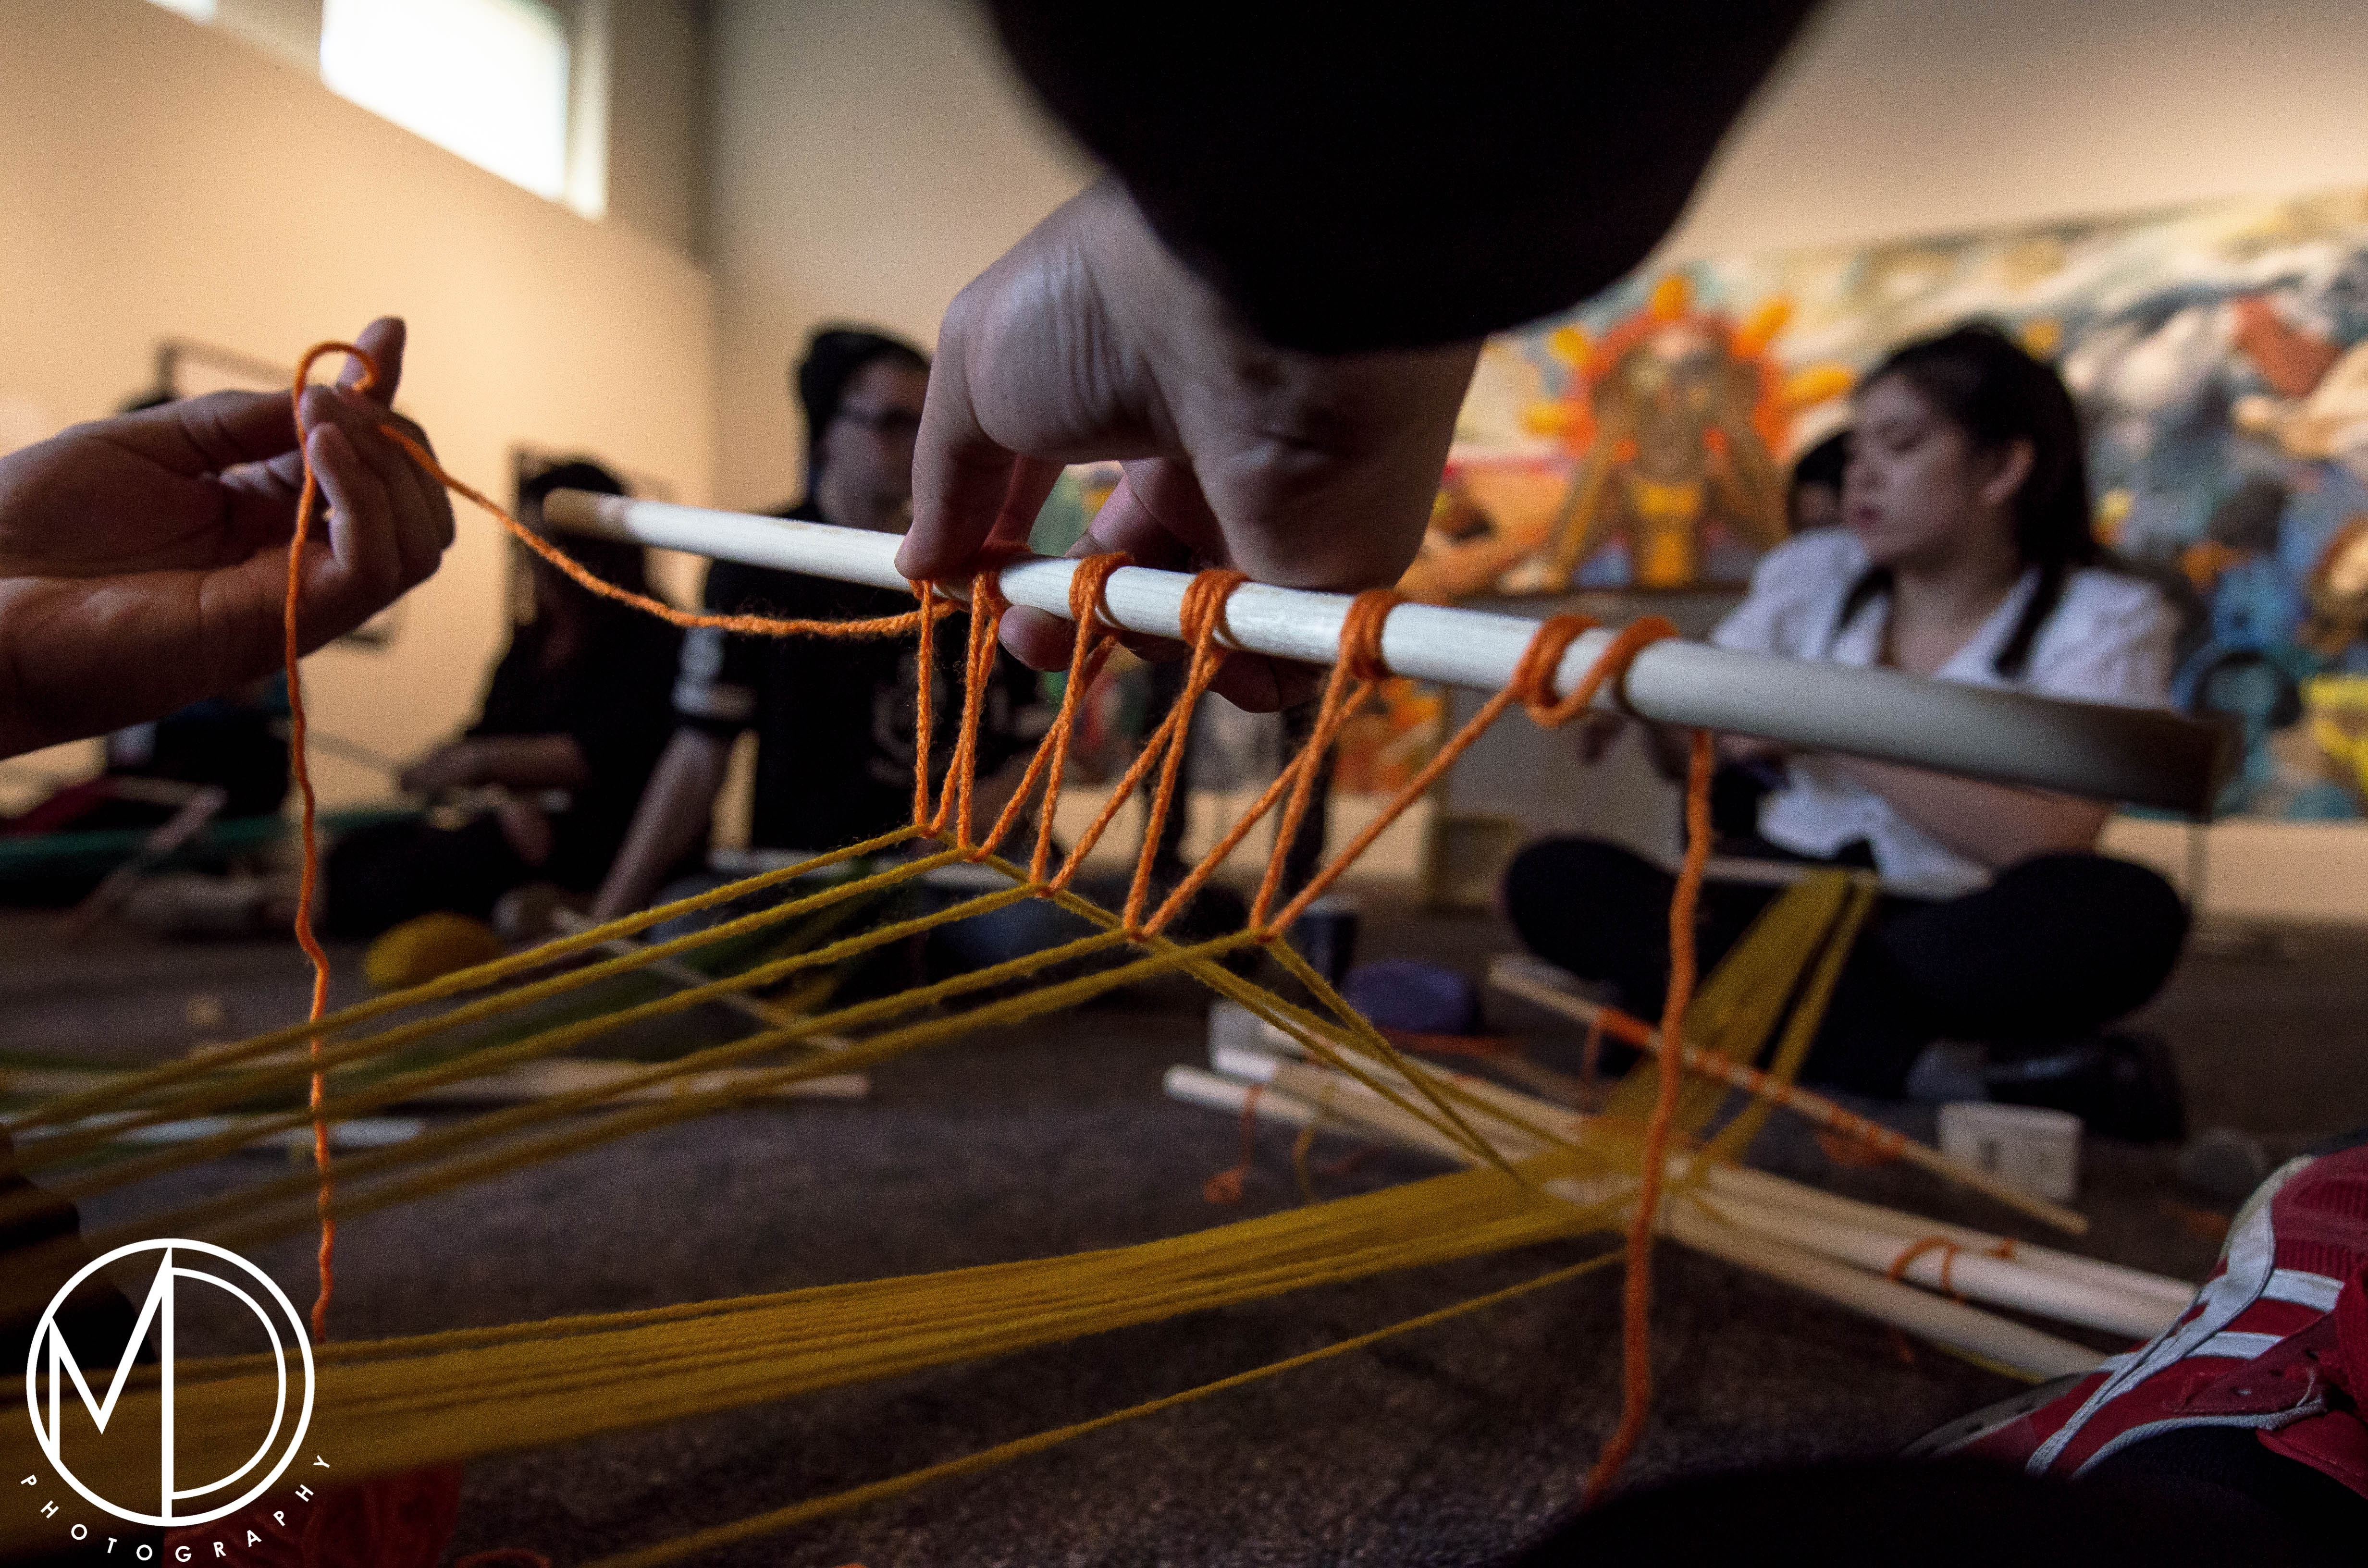 Weaving activity. (c) Field Museum of Natural History - CC BY-NC 4.0